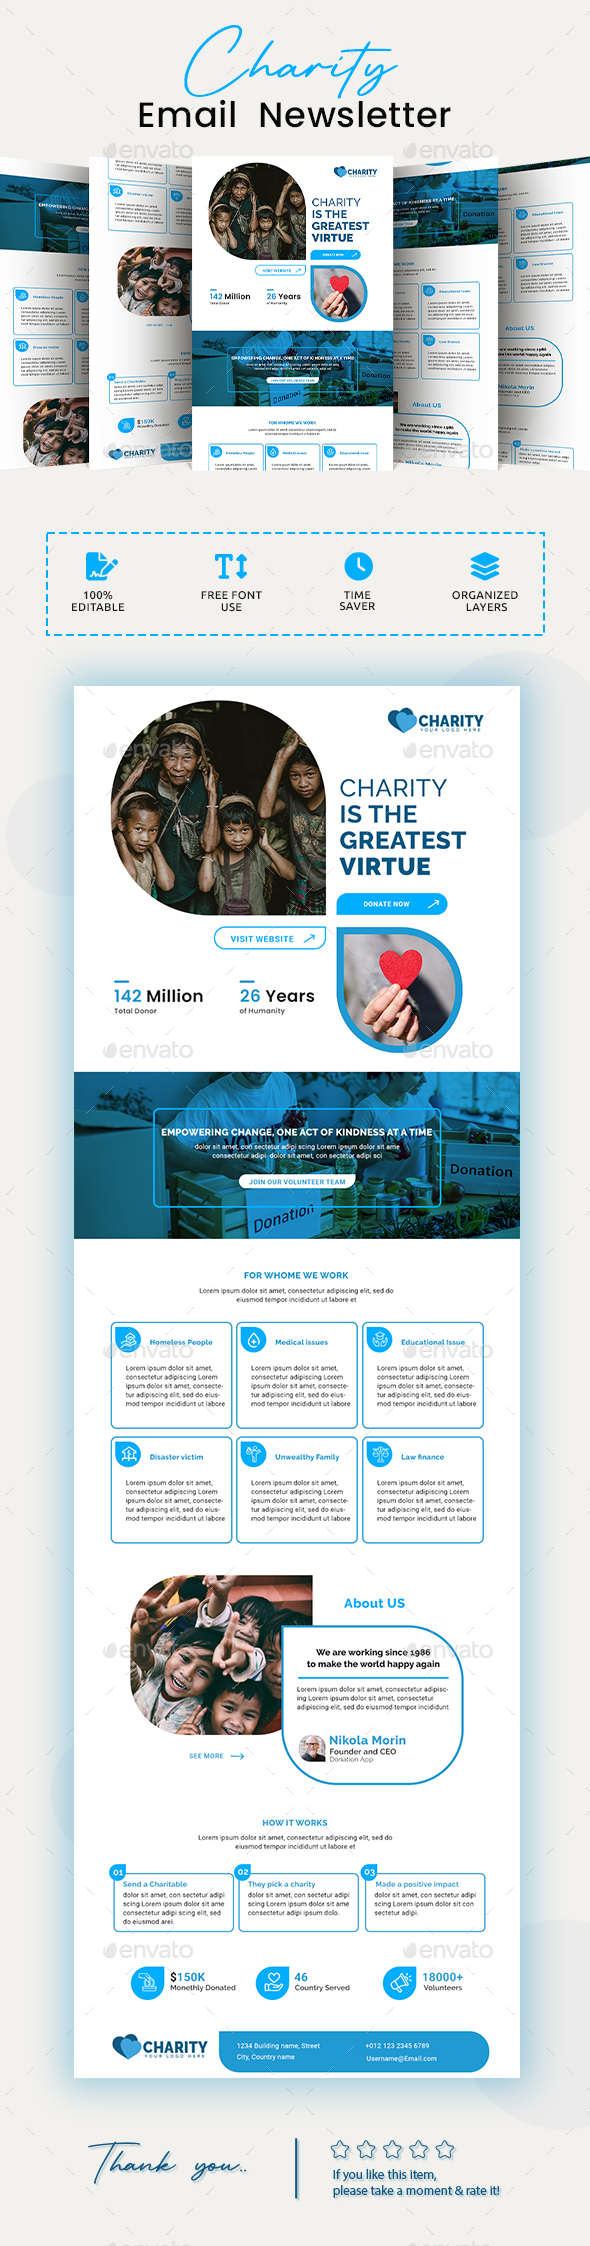 [DOWNLOAD]Charity Email Newsletter PSD Template